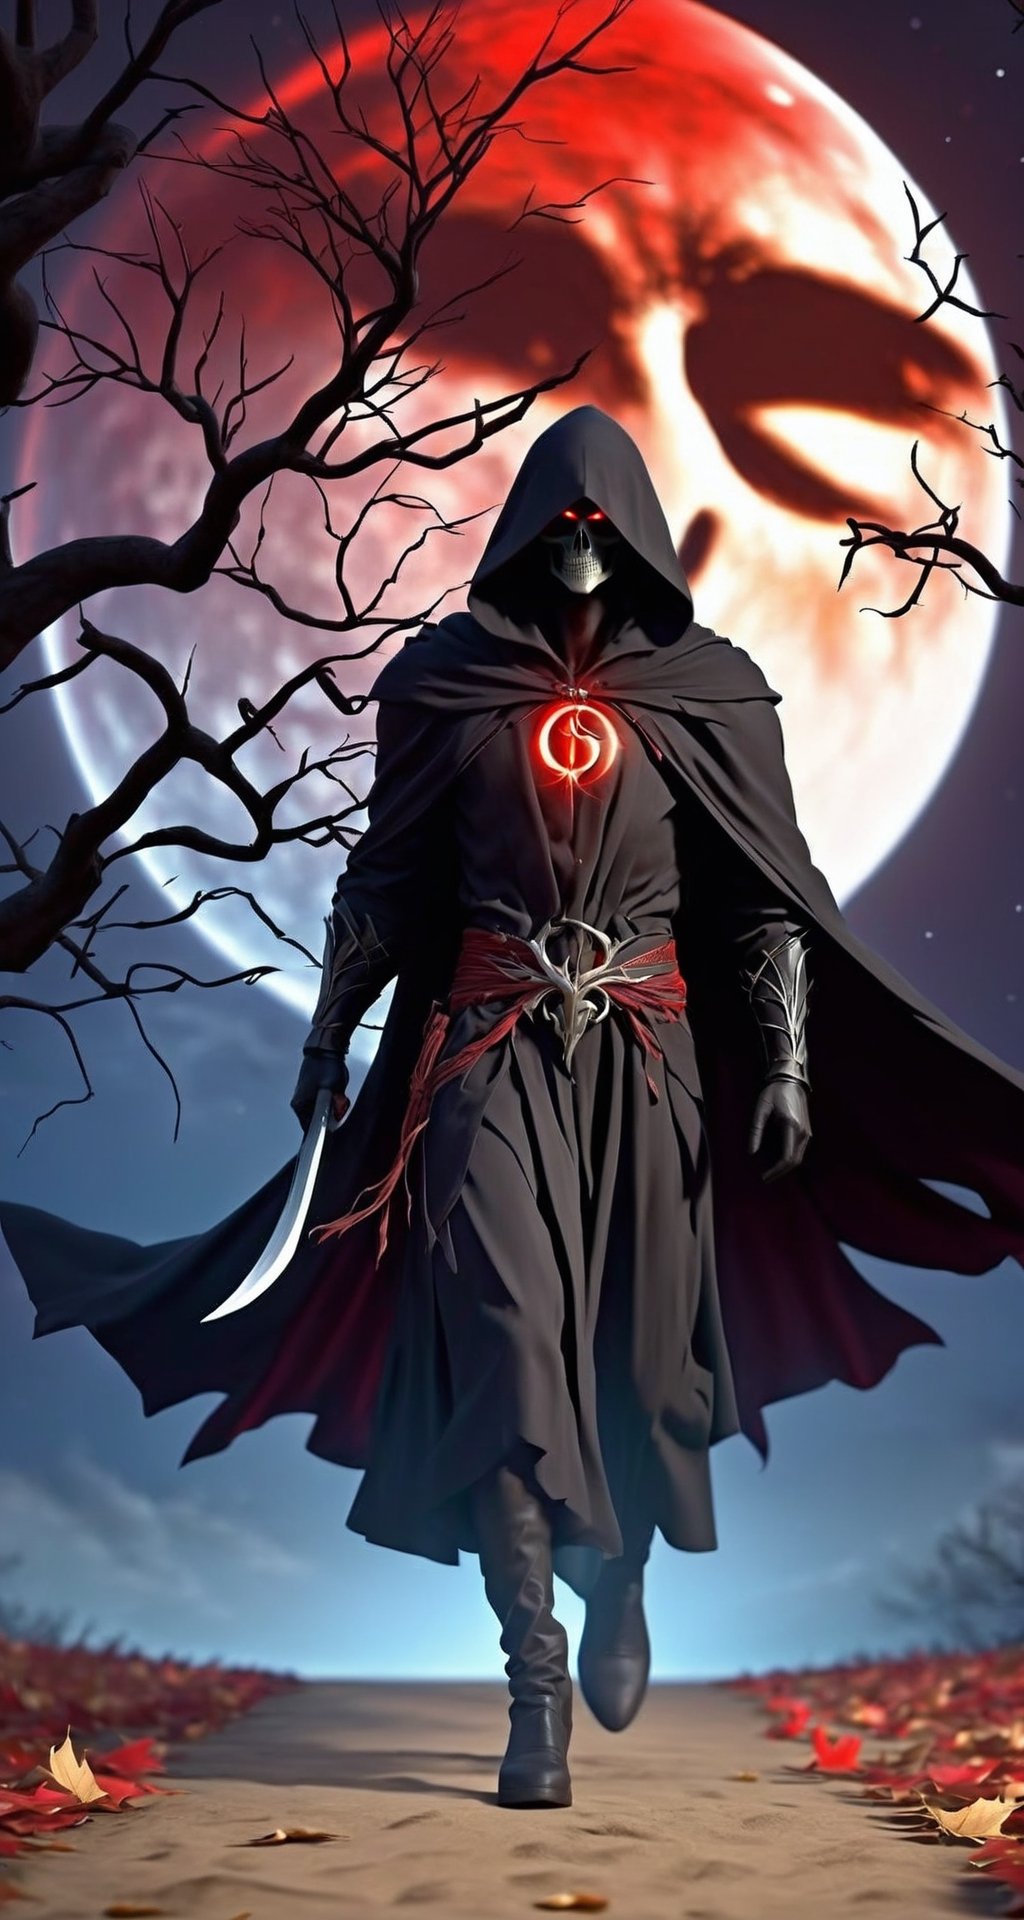 (grim reaper: 1.5), (full body), (black clothes: 1.5), (dark path: 1.3), (sickle: 1.4), (night sky: 1.2), (trees dry: 1.5), (dry leaves:1.4), (bright red moon:1.3), (falling leaves:1.5), (spectrum:1.5)
BREAK
(Realistic, Photorealistic: 1.5), (Masterpiece, Best Quality: 1.4), (Ultra High Resolution: 1.5), (RAW Photo: 1.2), (Face Focus: 1.2), (Ultra Detailed CG Unified 8k Wallpaper: 1.5), (Hyper Sharp Focus: 1.5), (Ultra Sharp Focus: 1.5), (Beautiful pretty face: 1.5), (professional photo lighting:1.3), , (super detailed background, detail background: 1.5), (elegant:1.3), (kinematic:1.4),realhands,monster